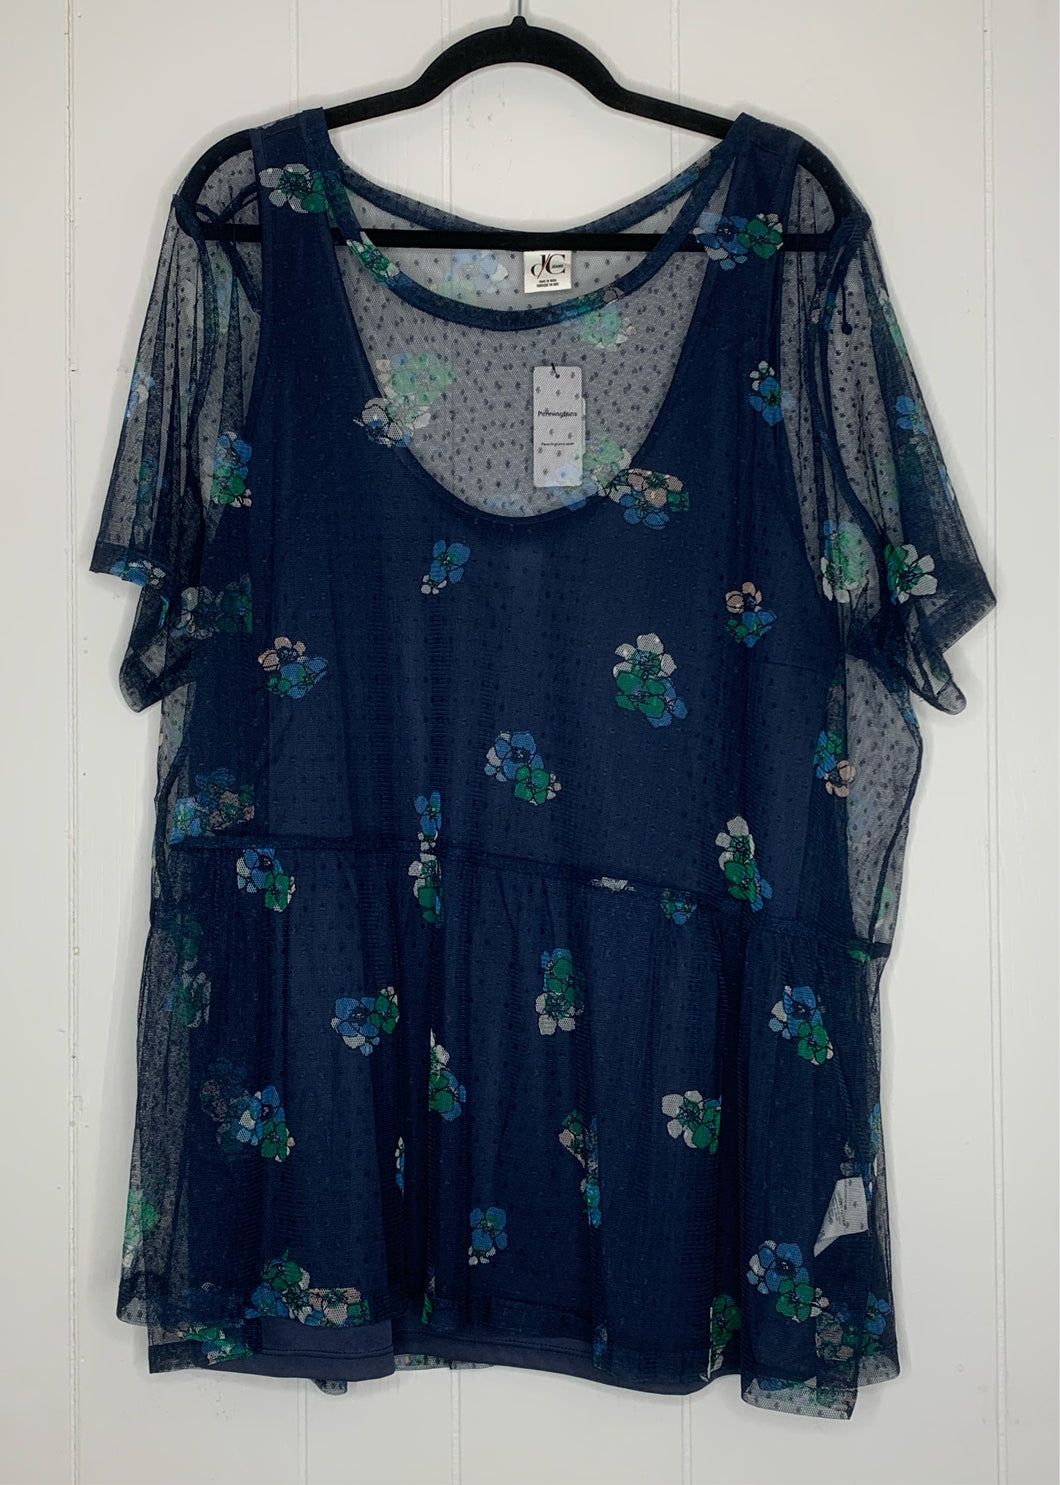 Blue Floral Blouse with Sheer Layer